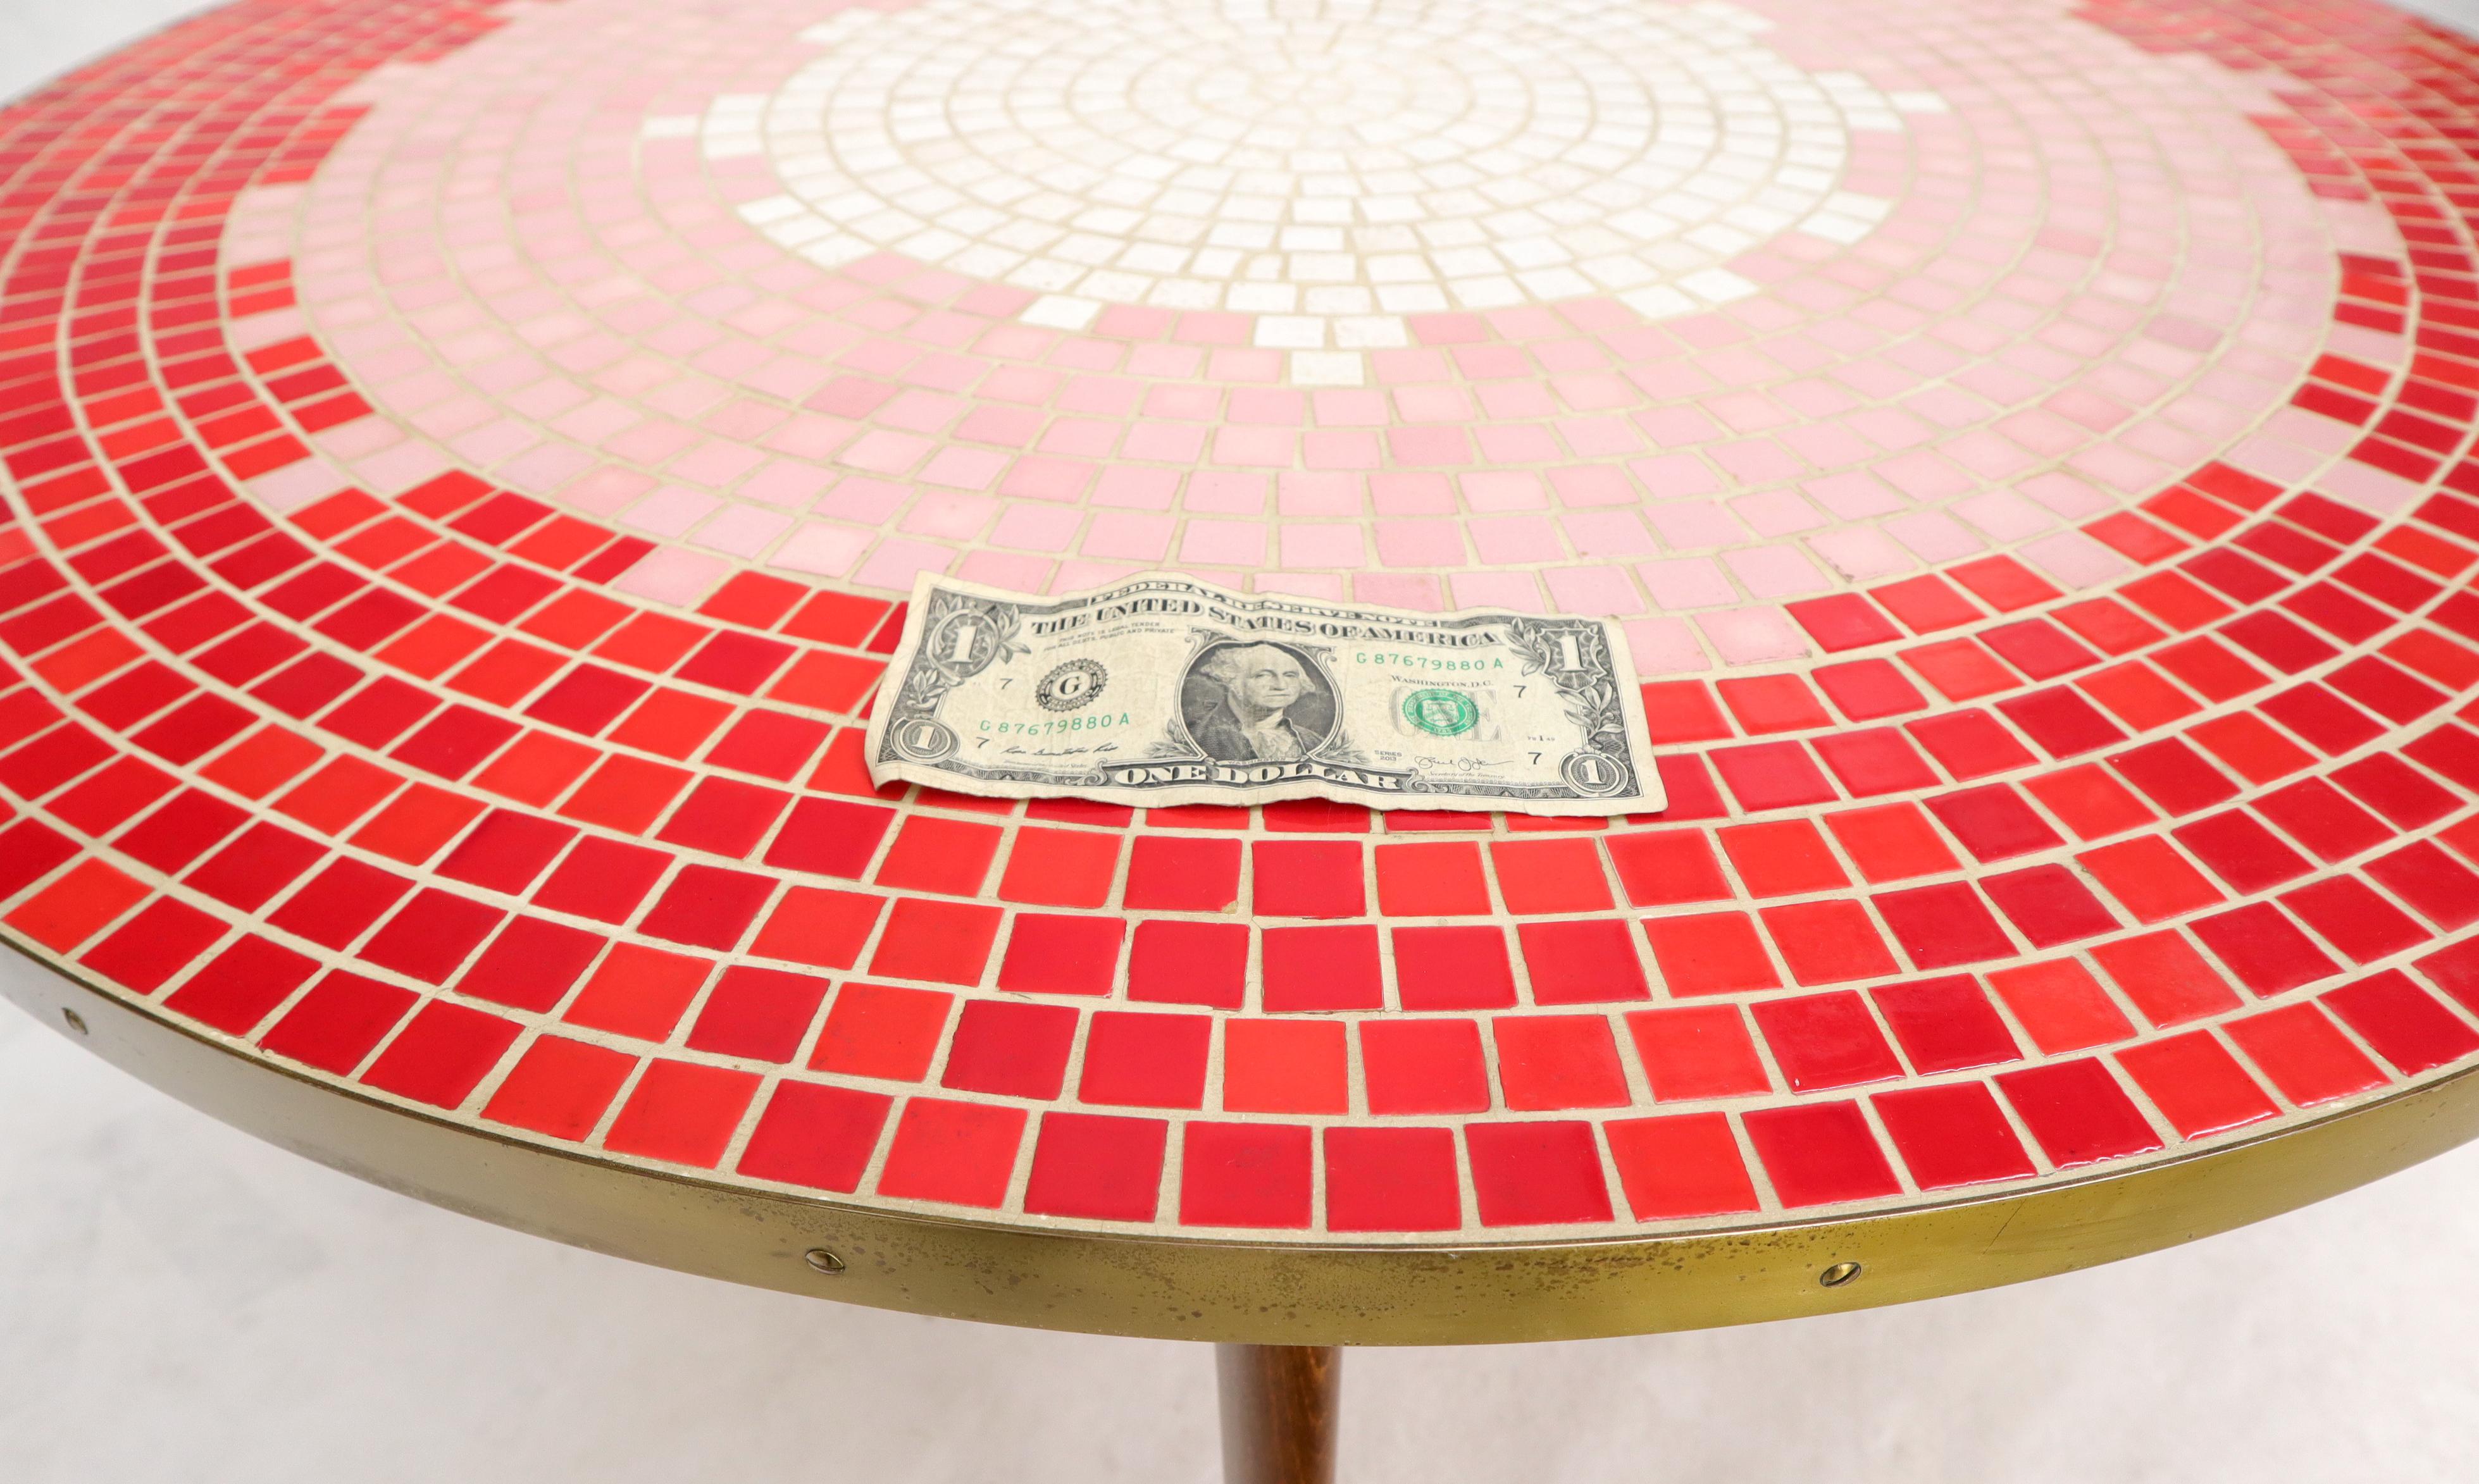 20th Century Sunburst Red Tile Mosaic Round Mid-Century Modern Coffee Table For Sale